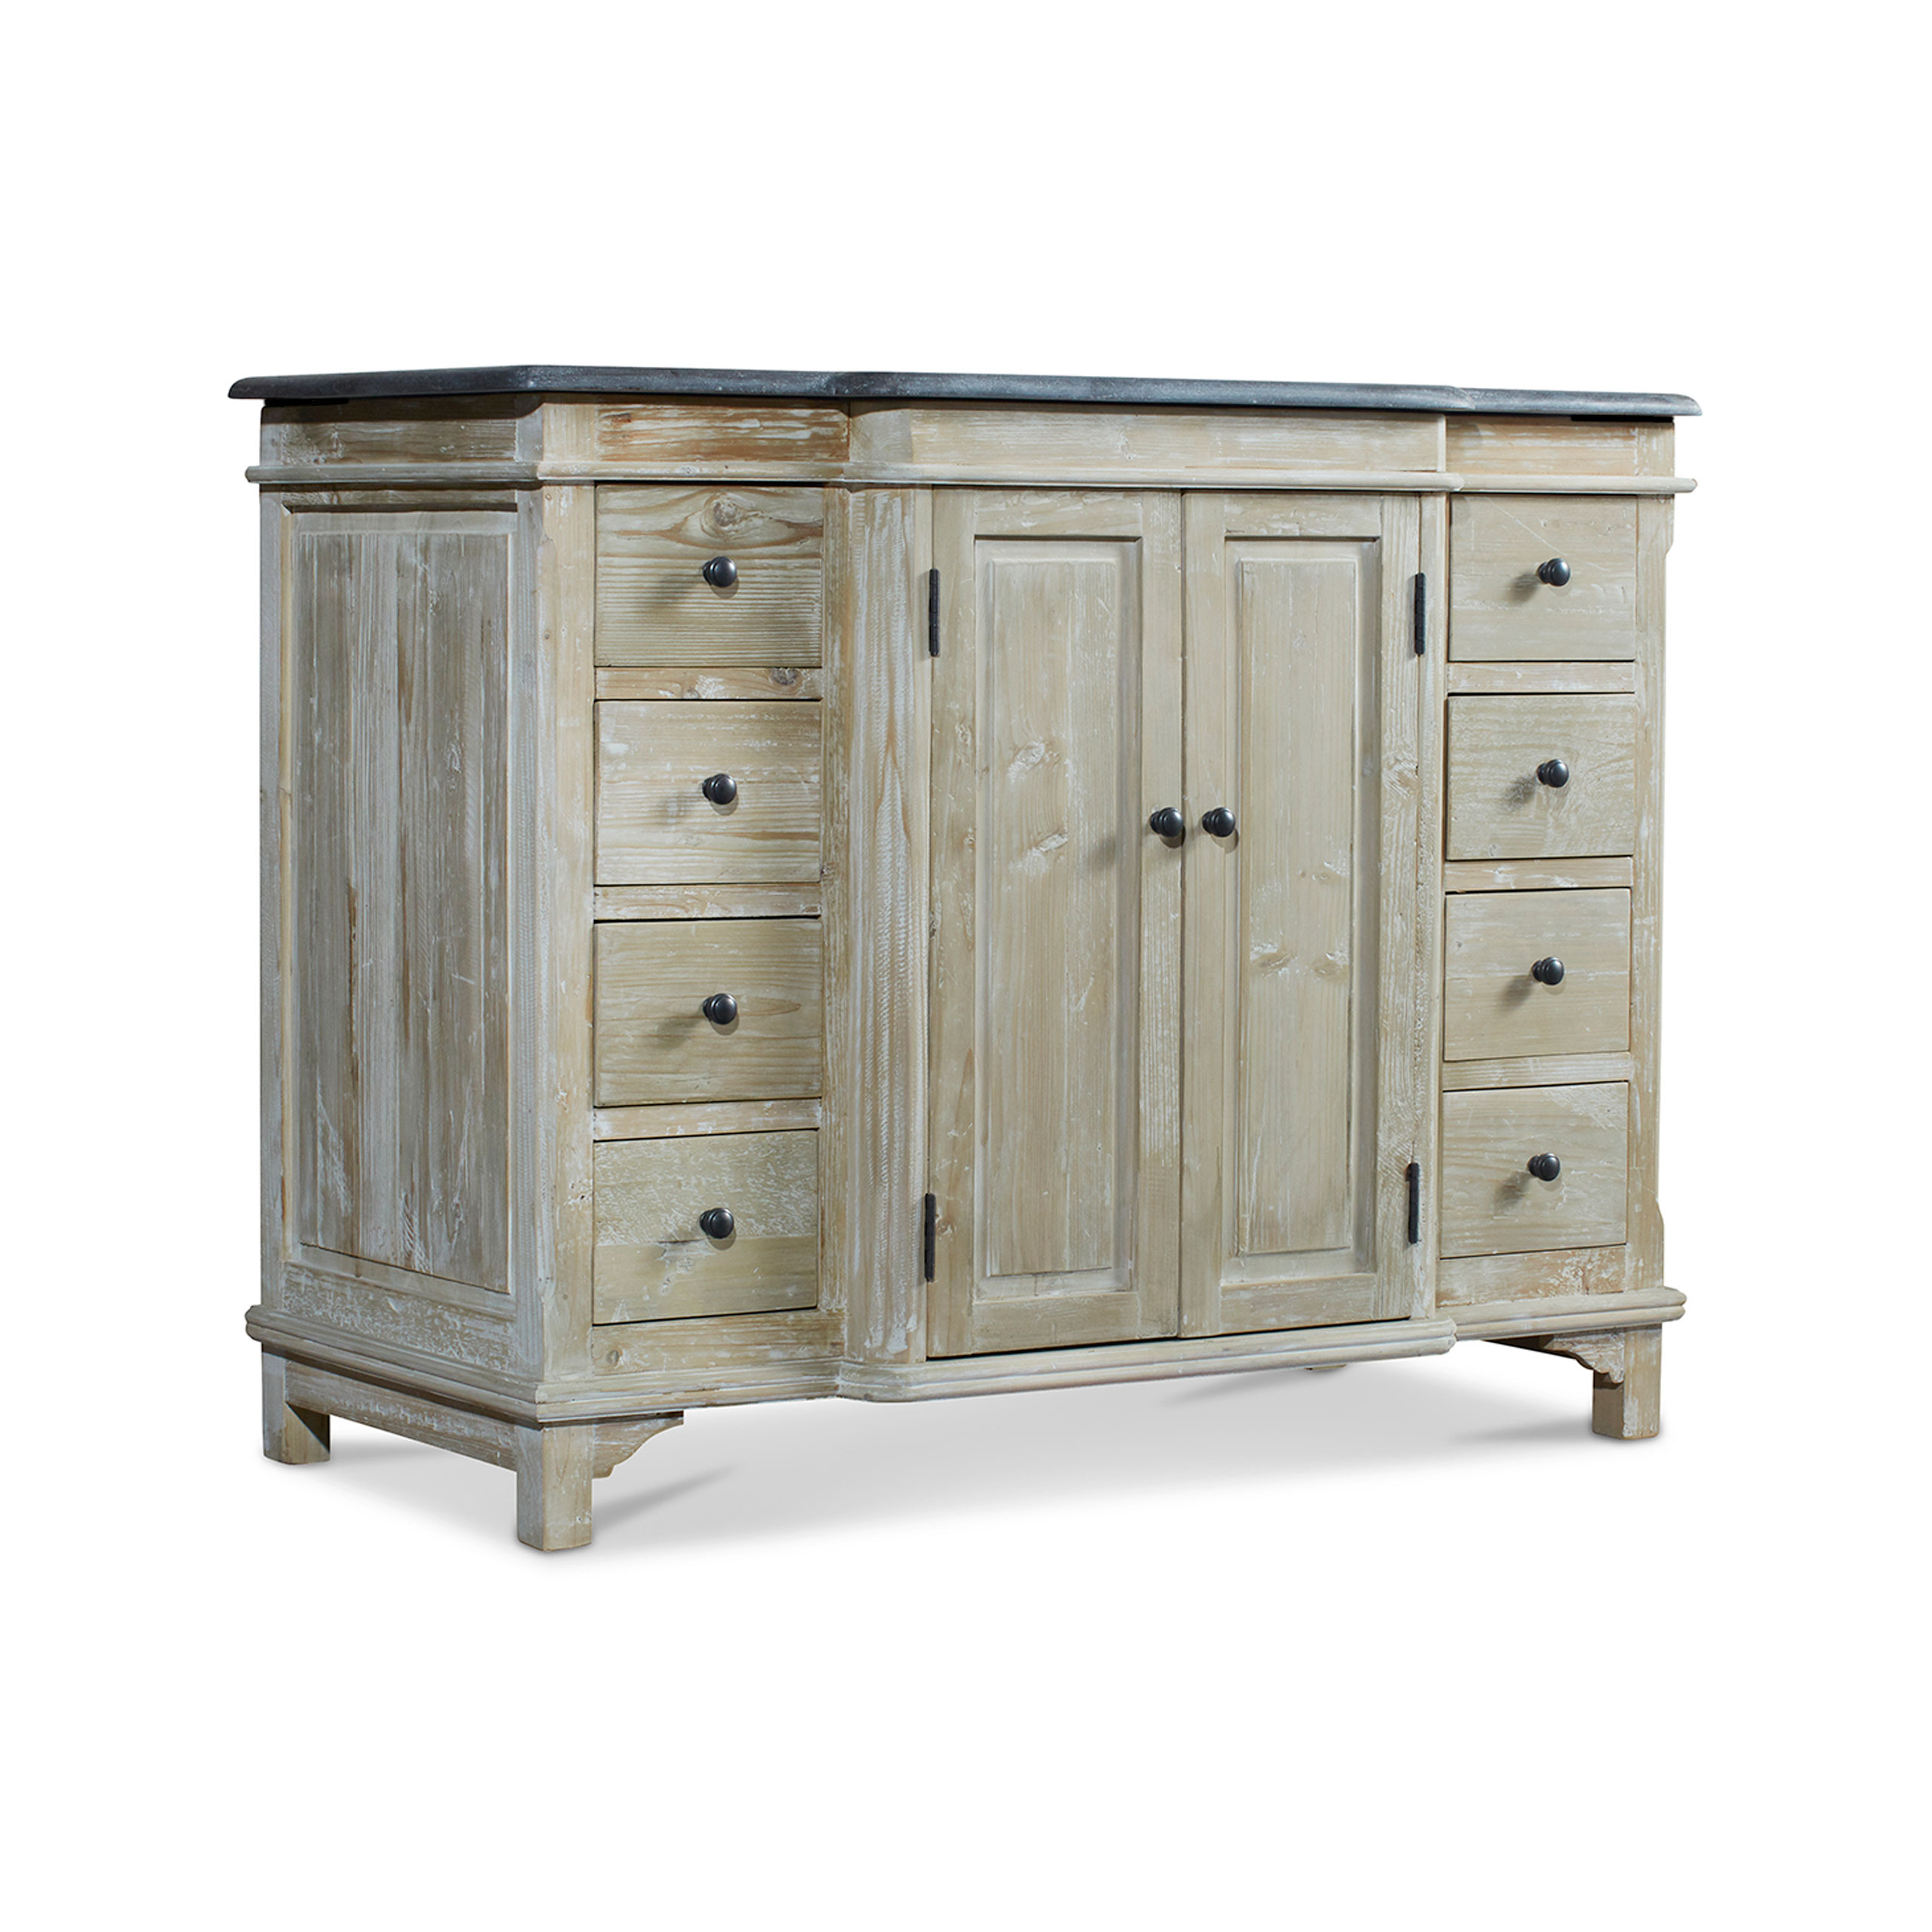 46" Handcrafted Reclaimed Pine Solid Wood Single Bath Vanity- WASH Finish 